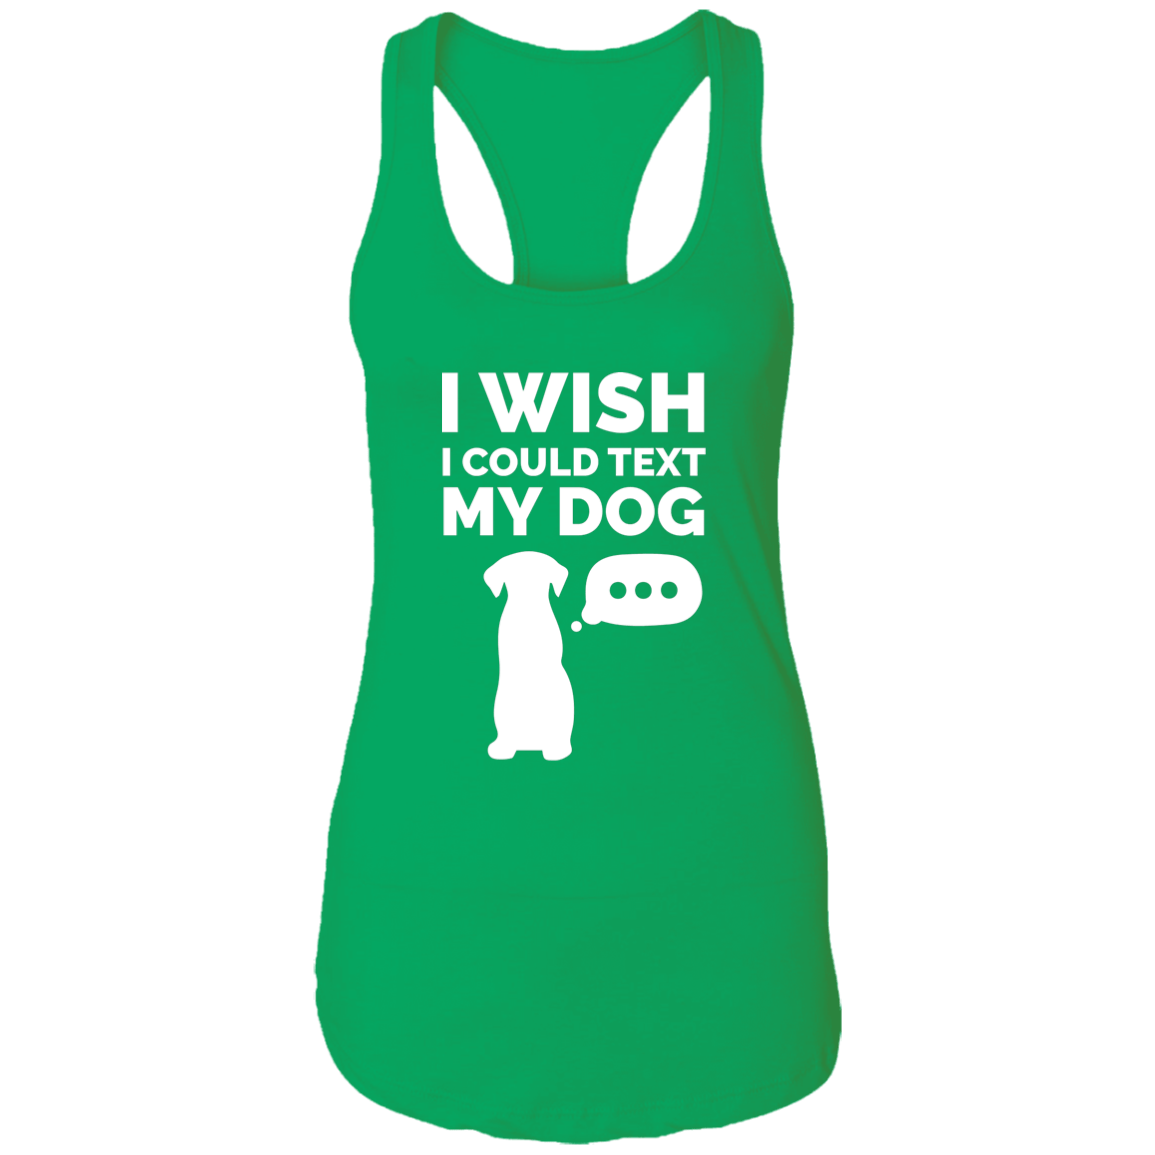 I Wish I Could Text My Dog - Ladies Racer Back Tank.